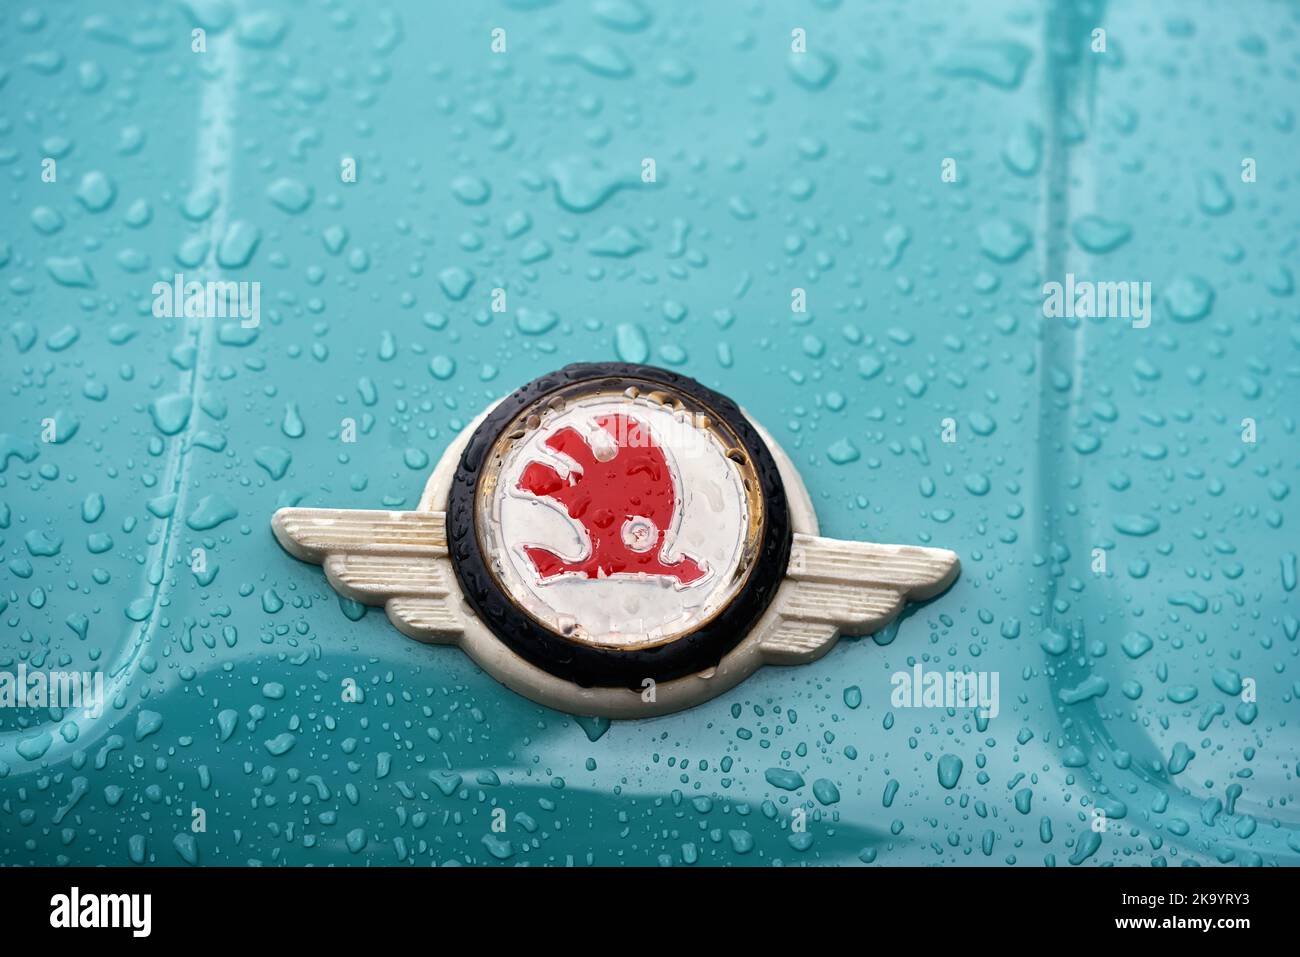 PRAGUE, CZECH REPUBLIC - OCTOBER 1, 2022: Old Skoda logo on a blue vintage car with droplets of water Stock Photo